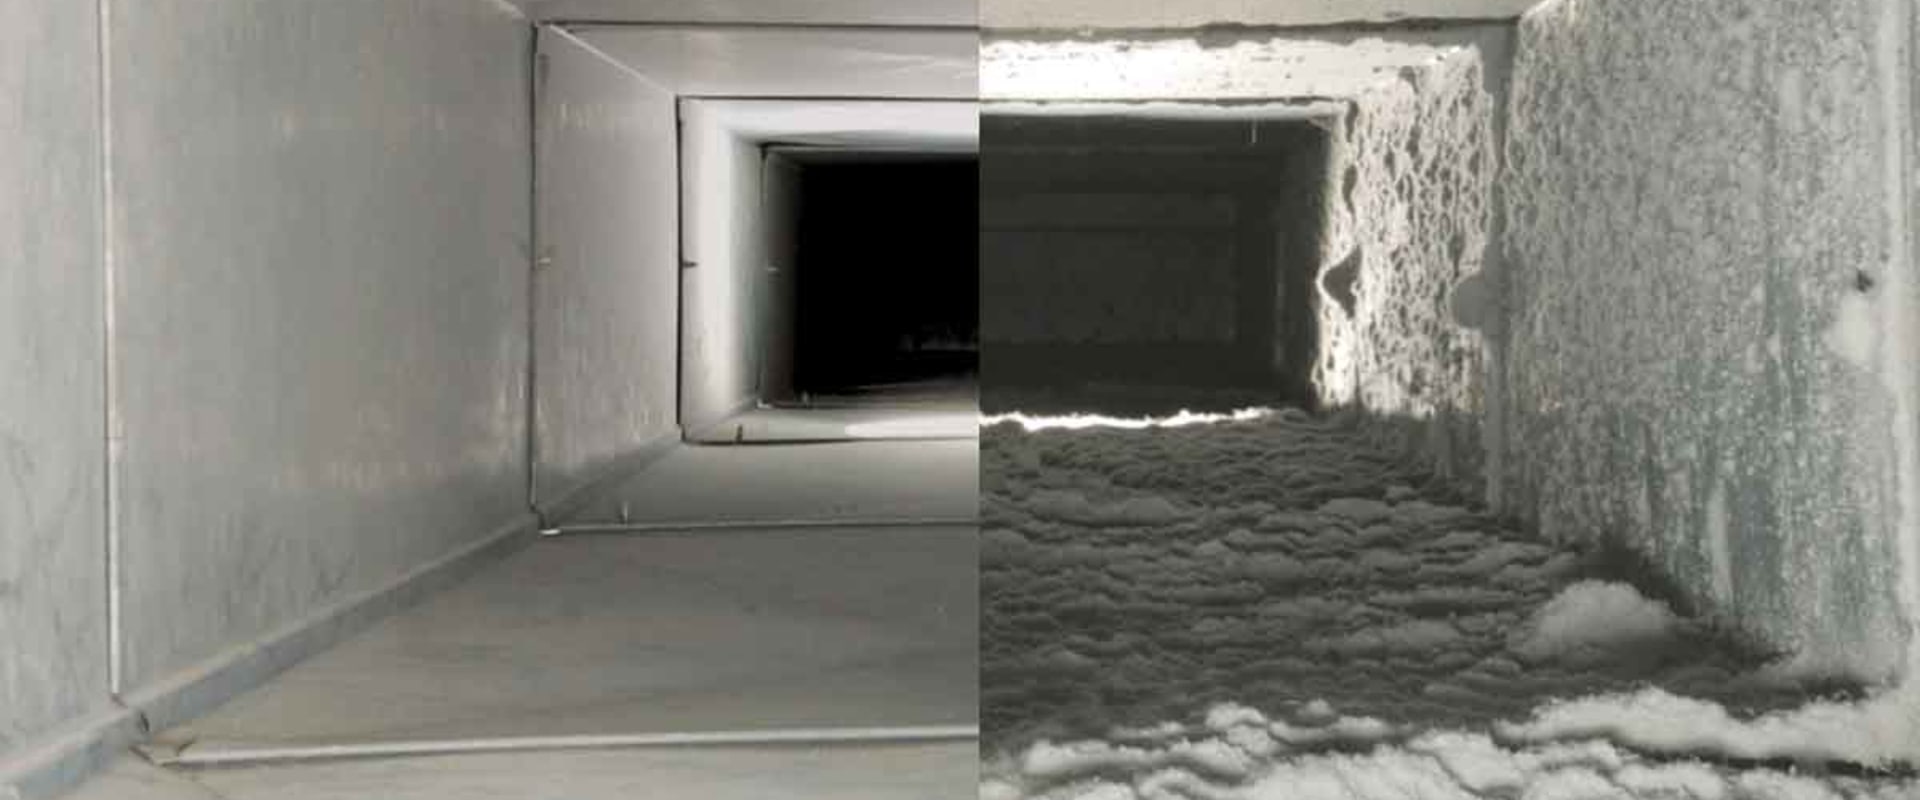 Duct Sealing Requirements in Miami-Dade County, FL: A Comprehensive Guide